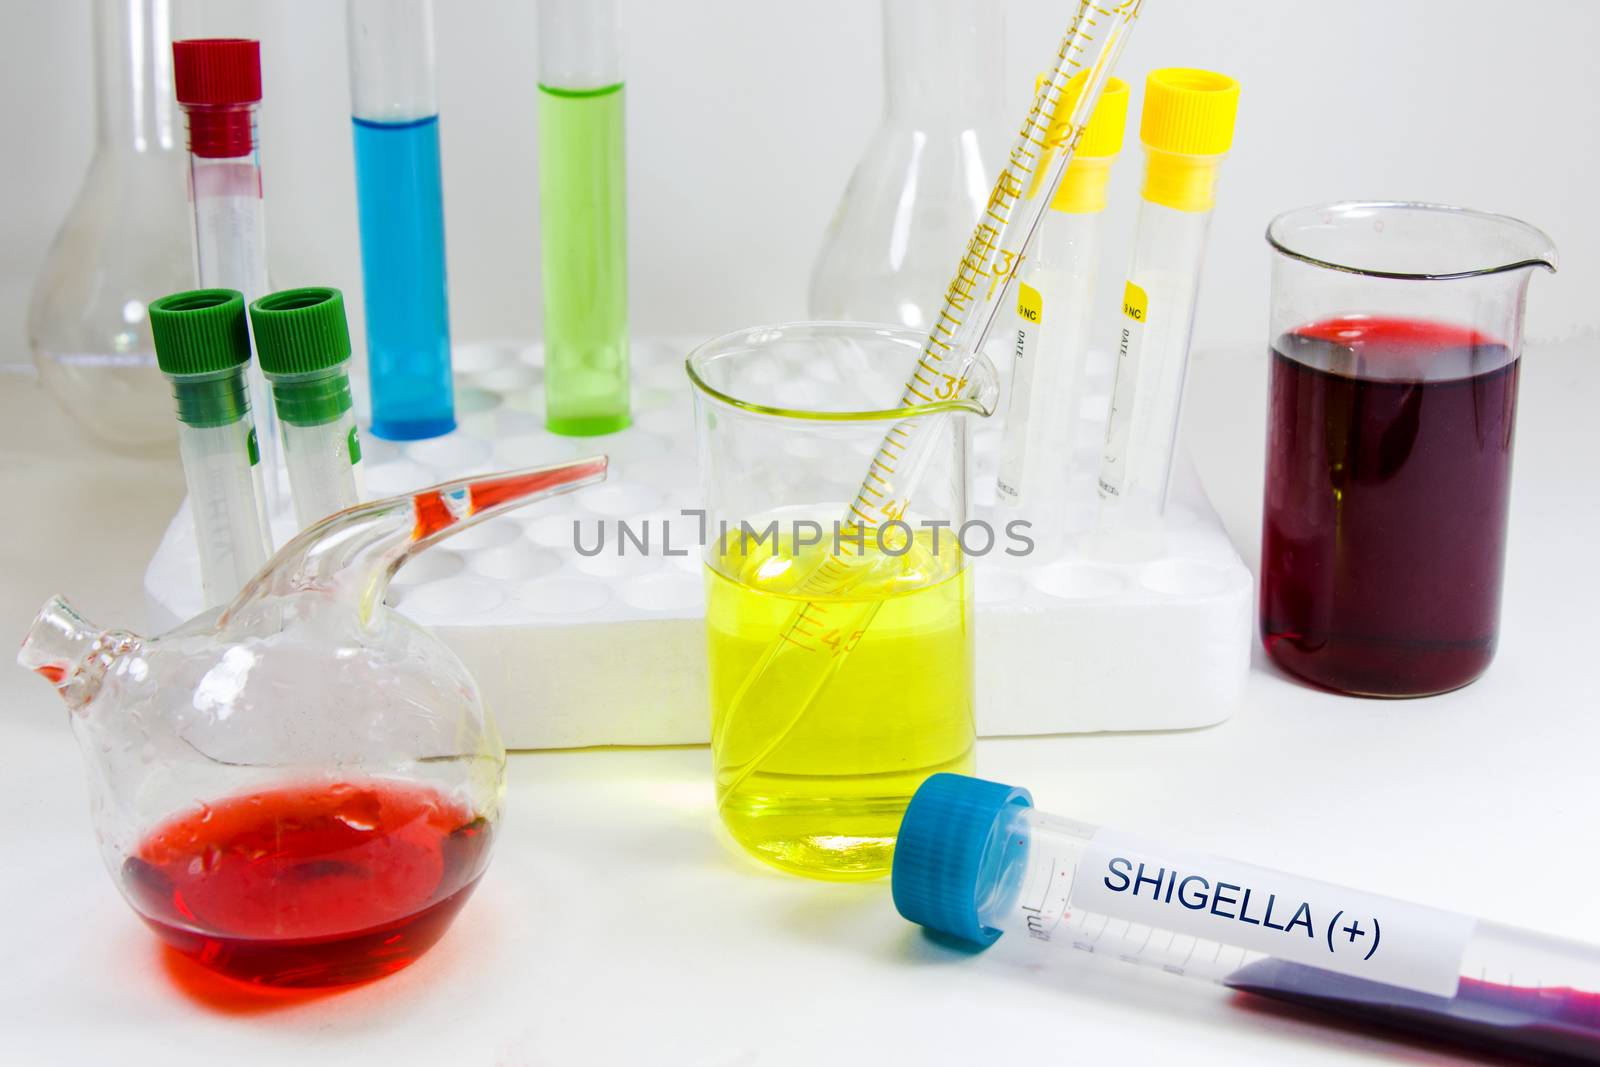 Shigella bacteria, blood test tube samples, positive test diagnoses, laboratory and chemical elements